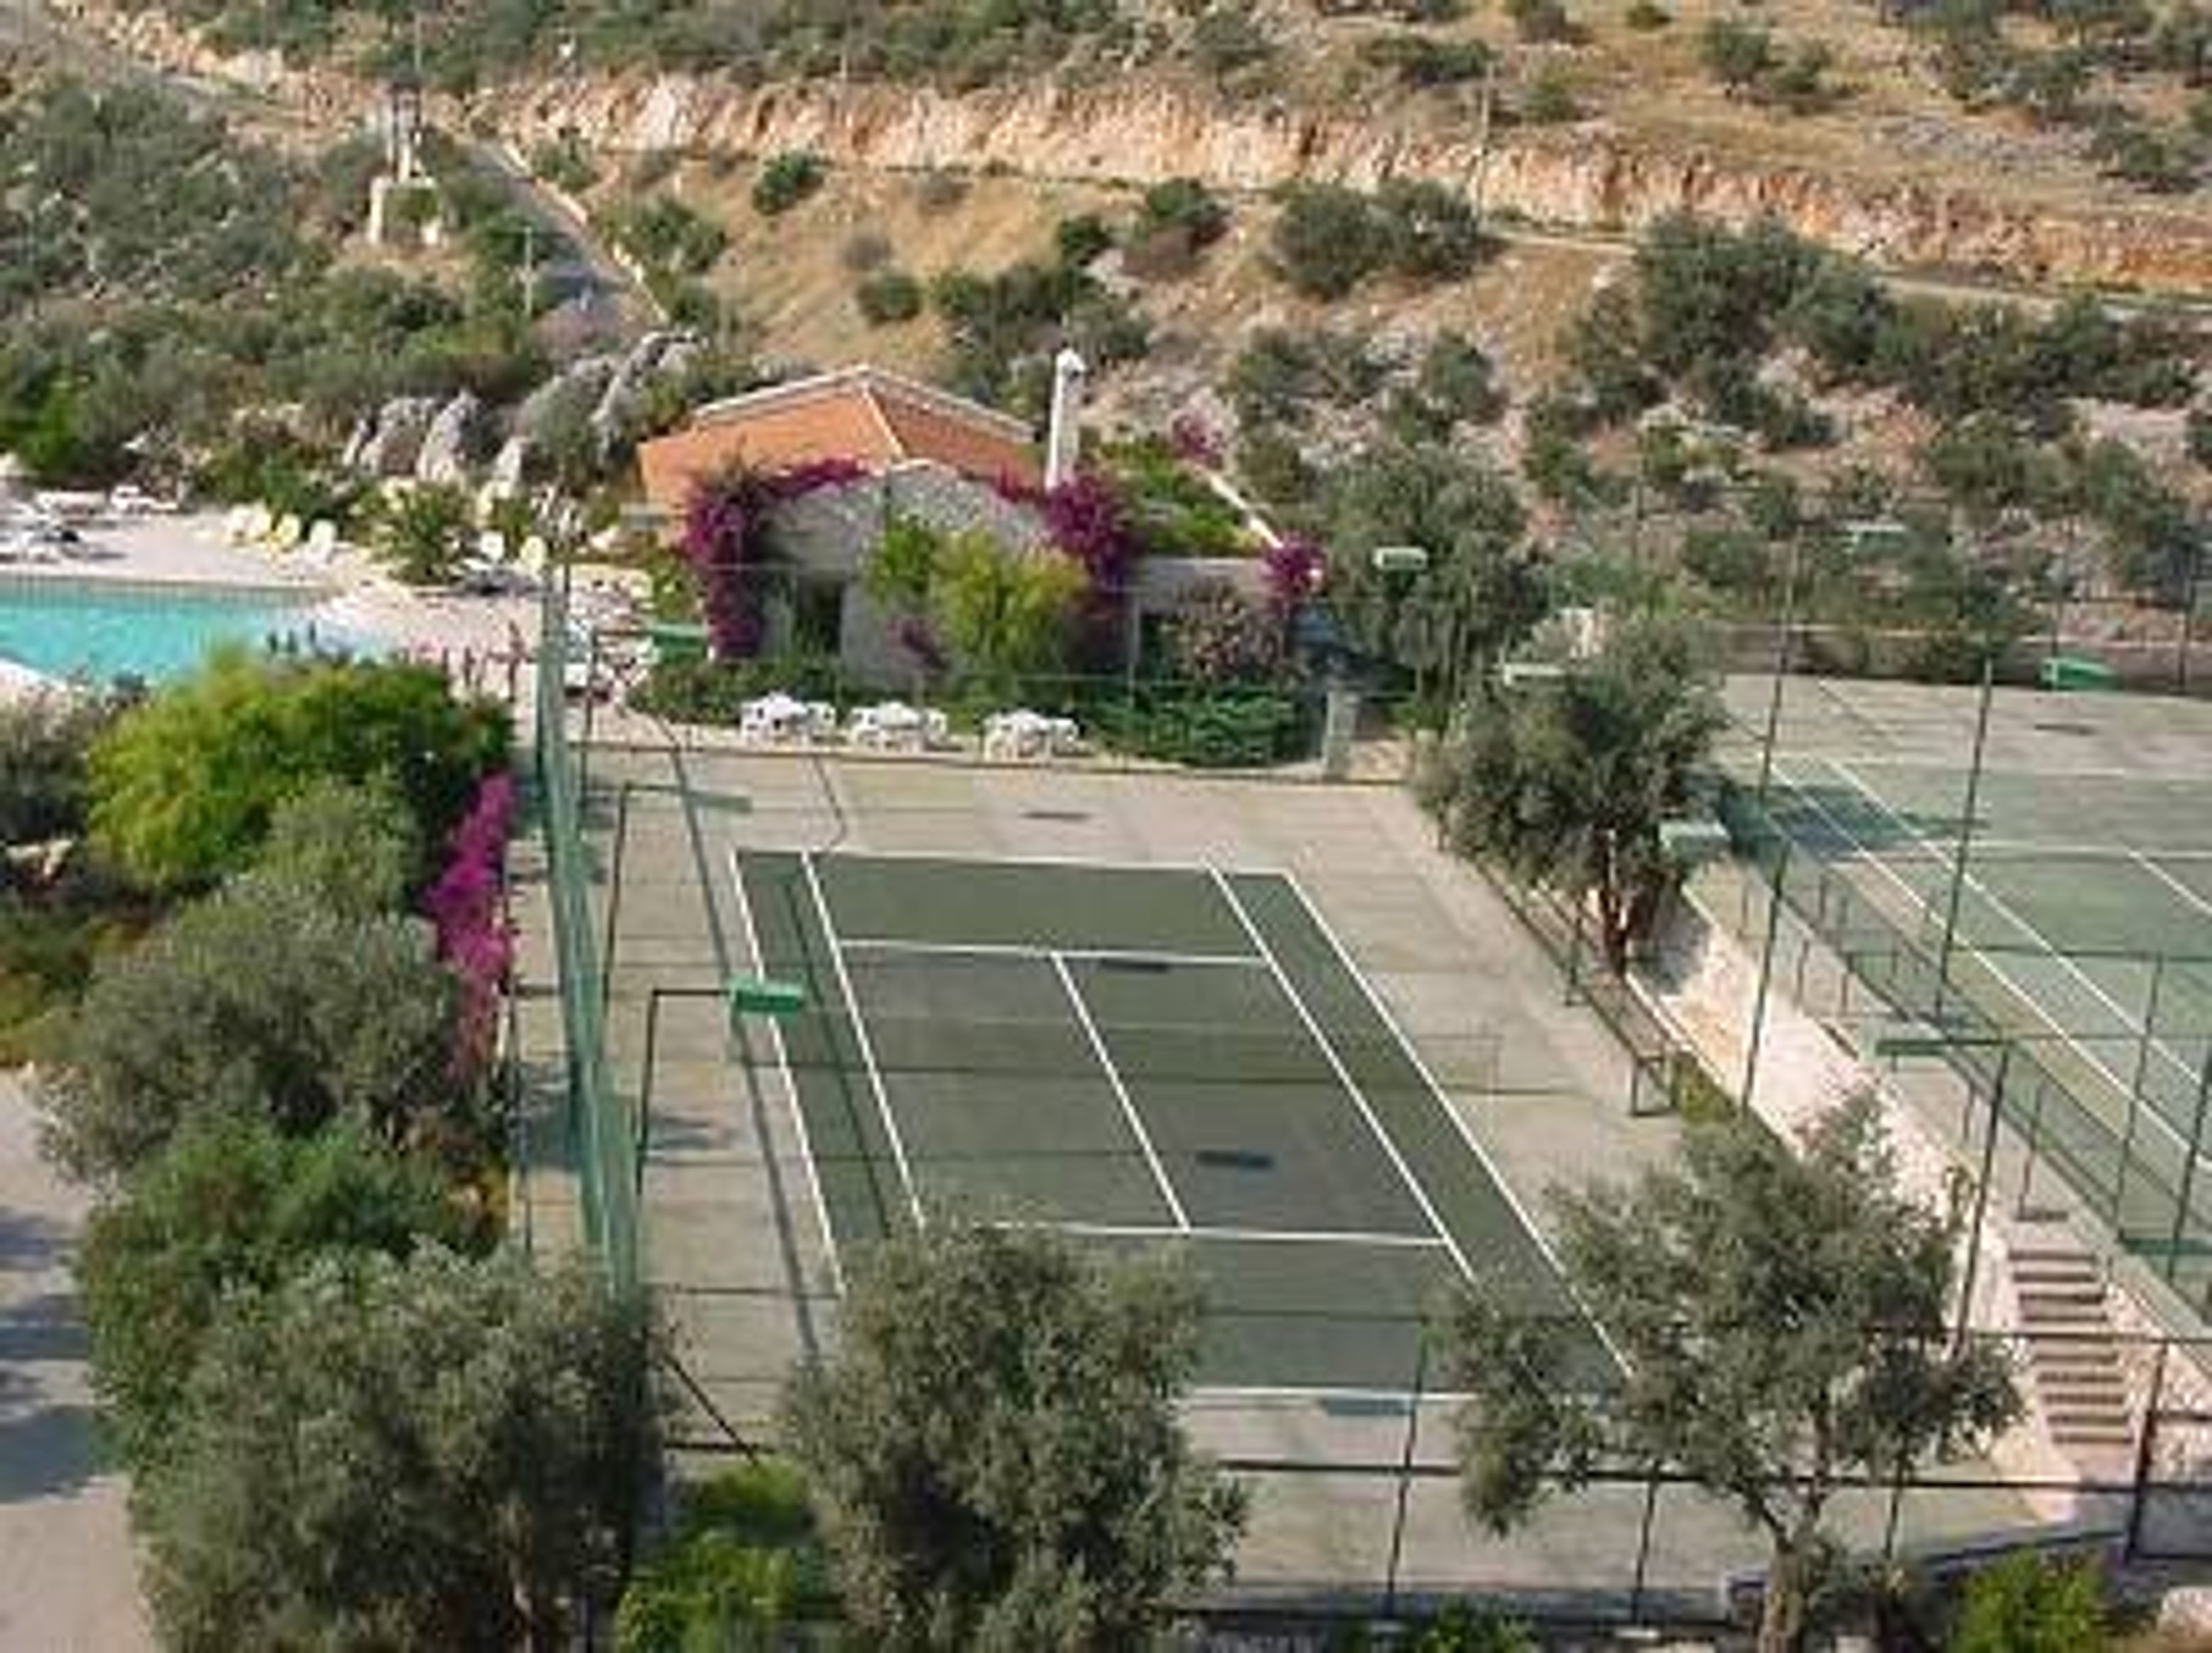 Tennis Courts for your enjoyment